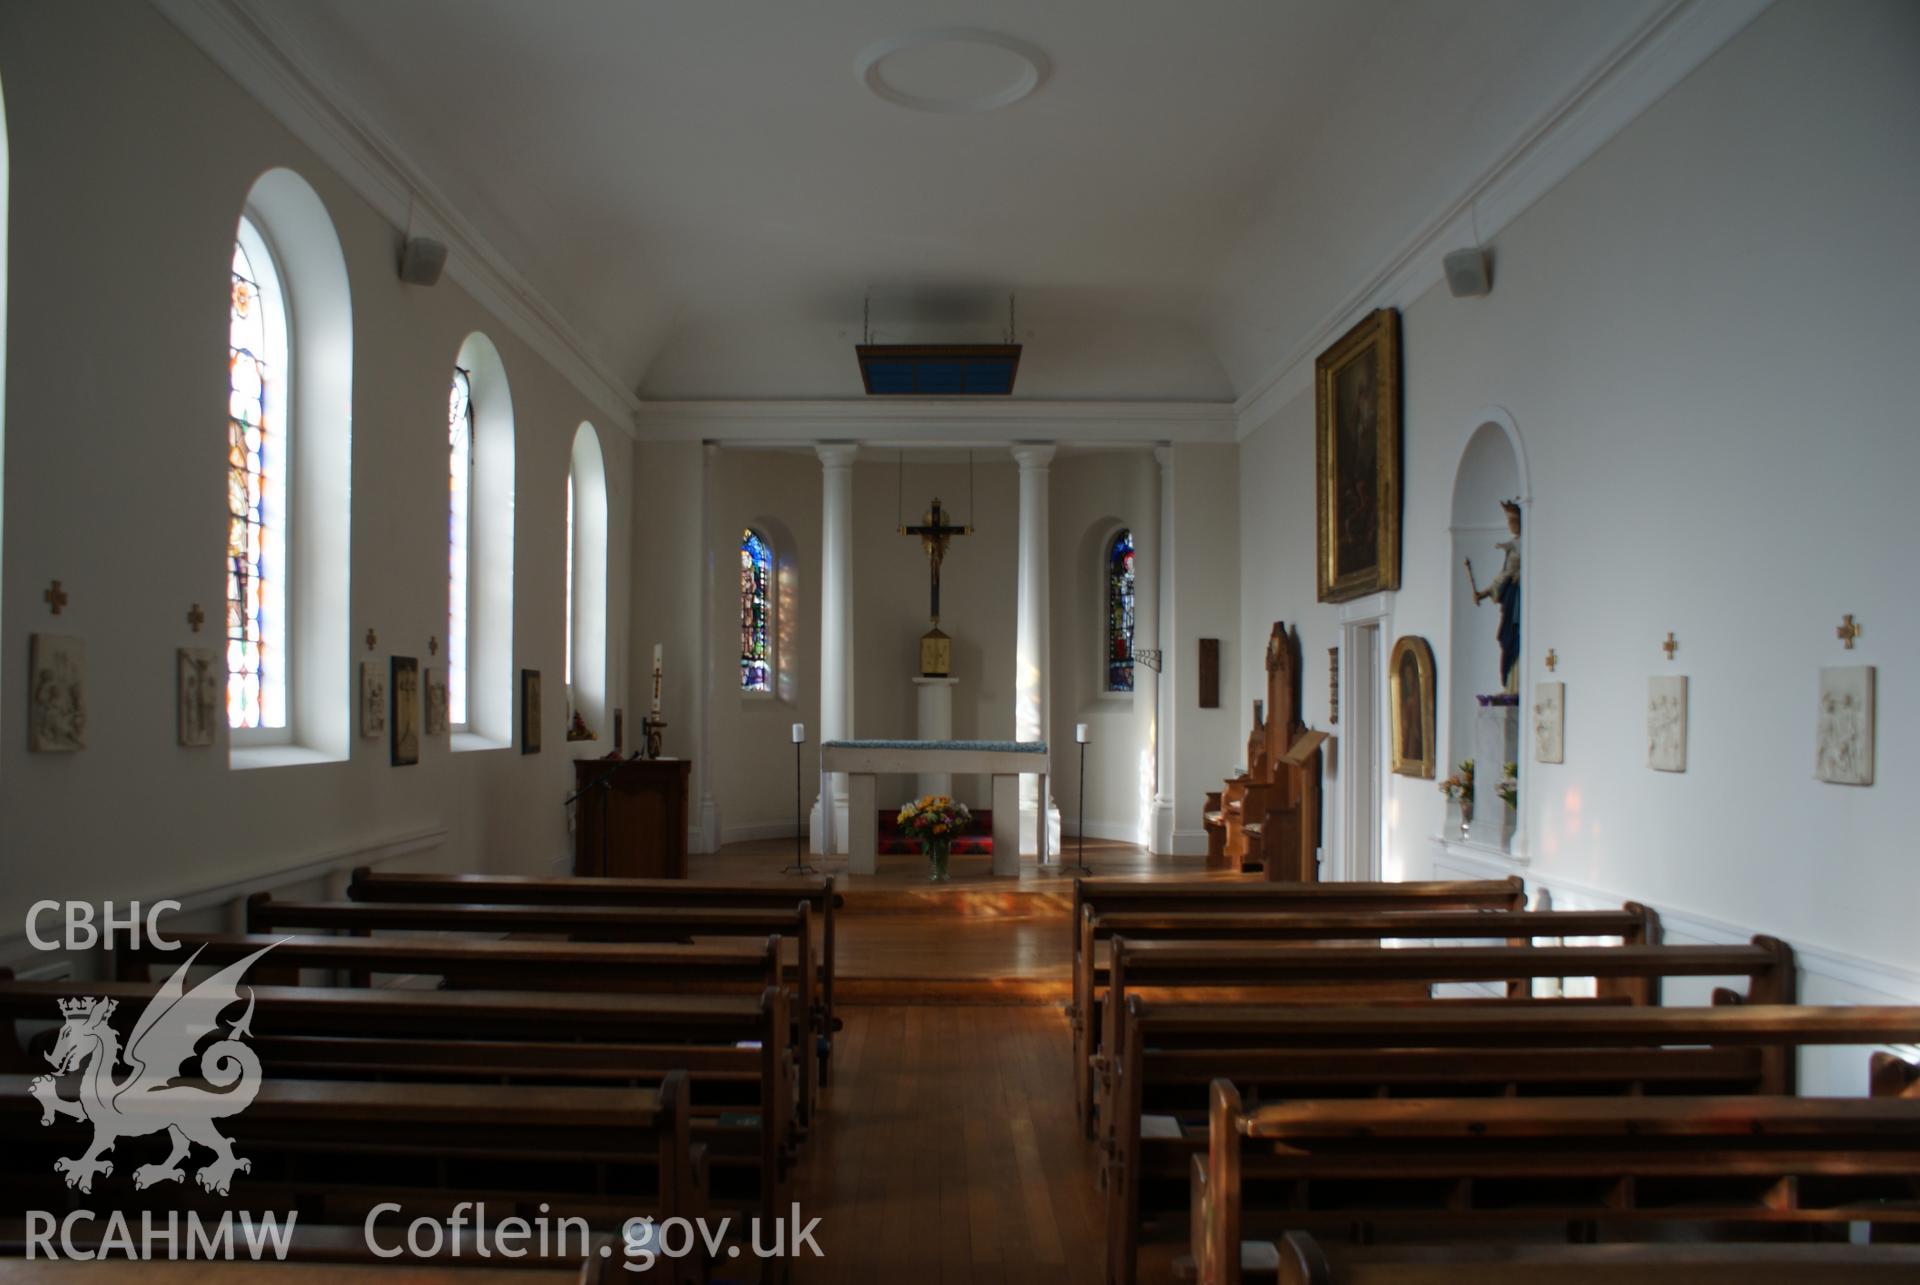 Digital colour photograph showing interior of St Mary and St Michael Catholic church, Llanarth.